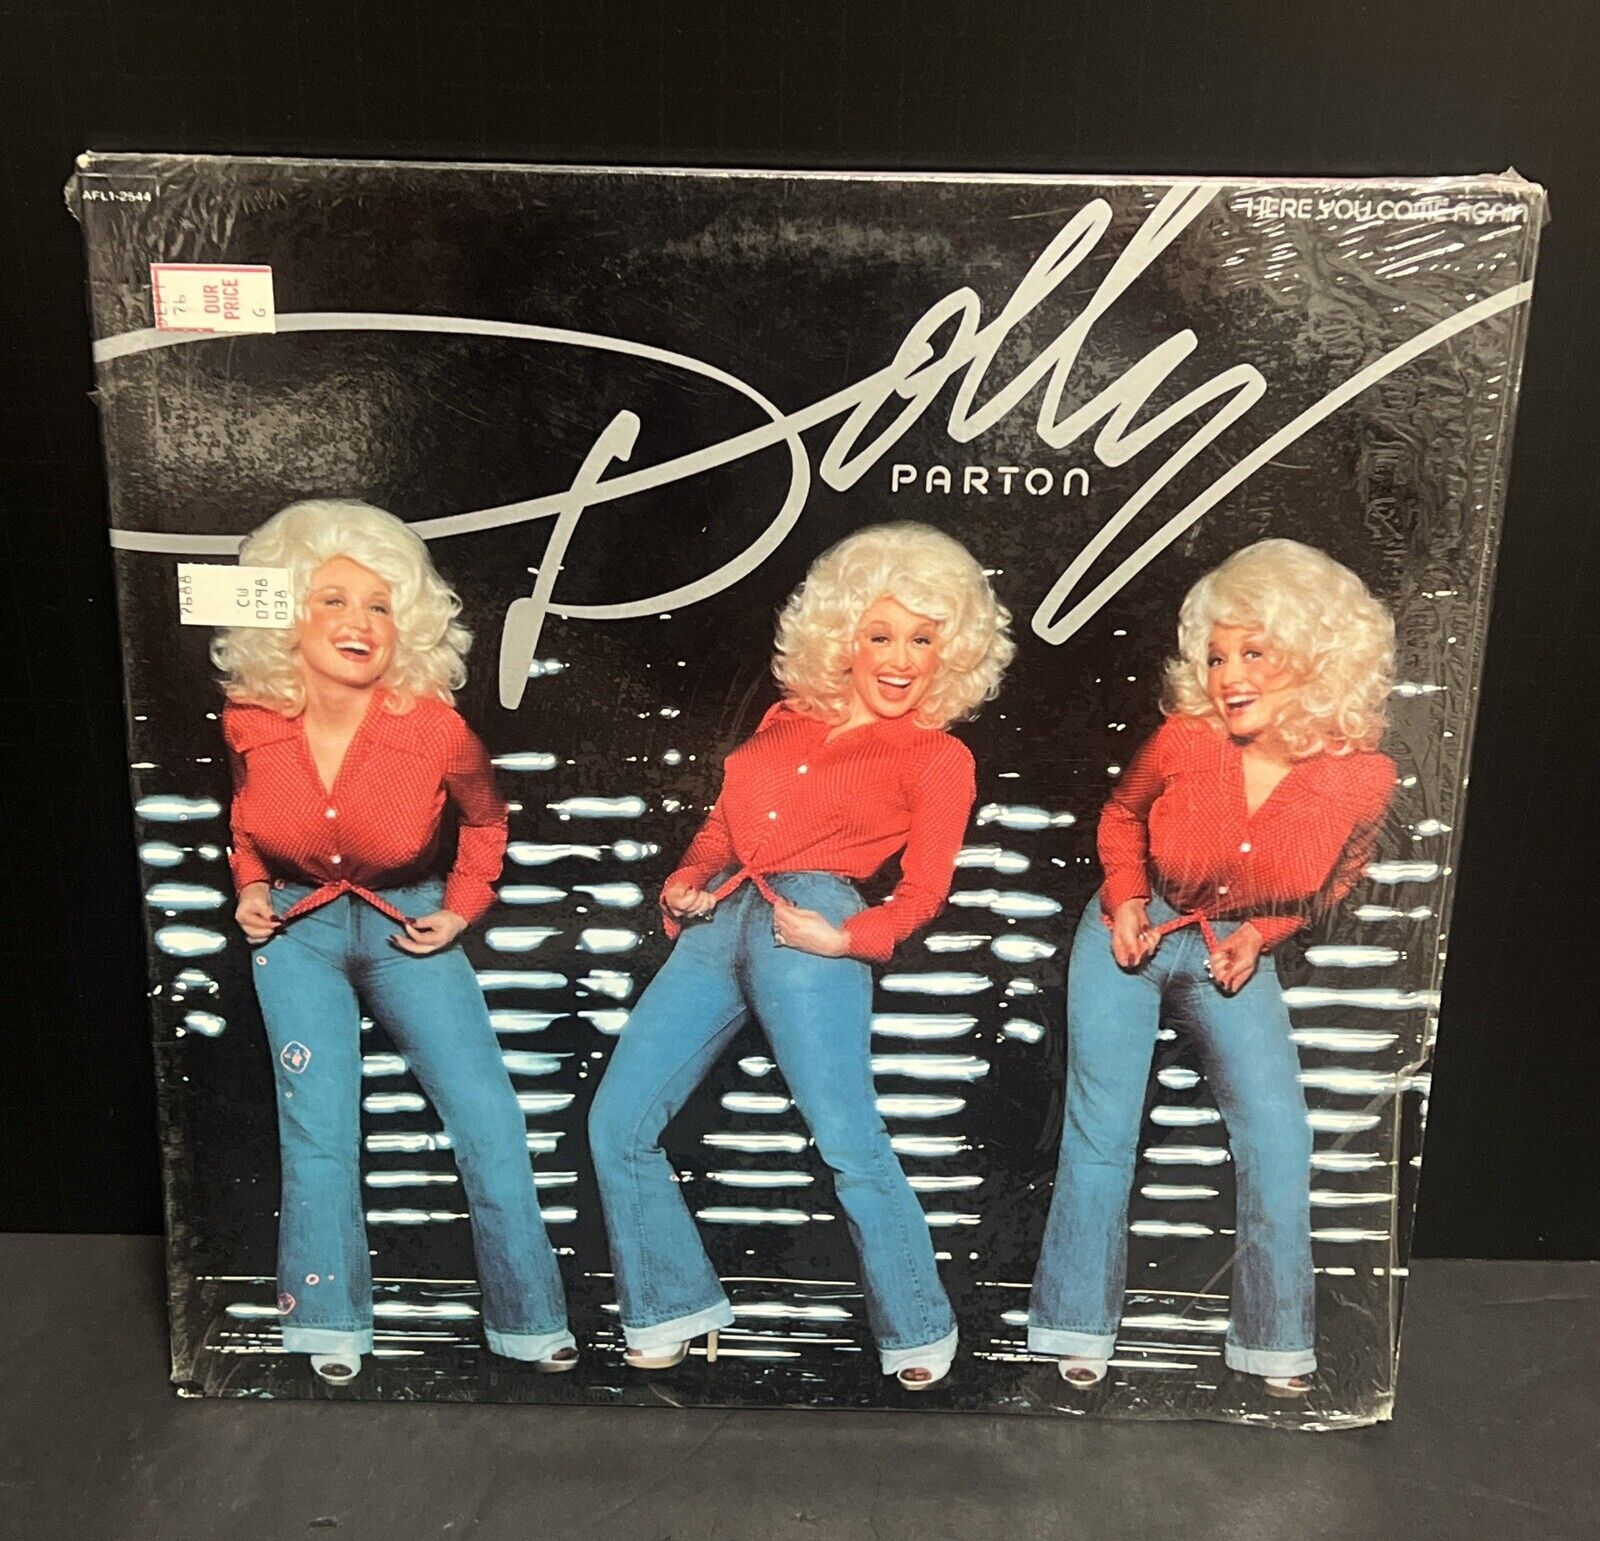 Dolly Parton Here You Come Again 1977 Vinyl Record RCA Victor afl1-2544 Shrink